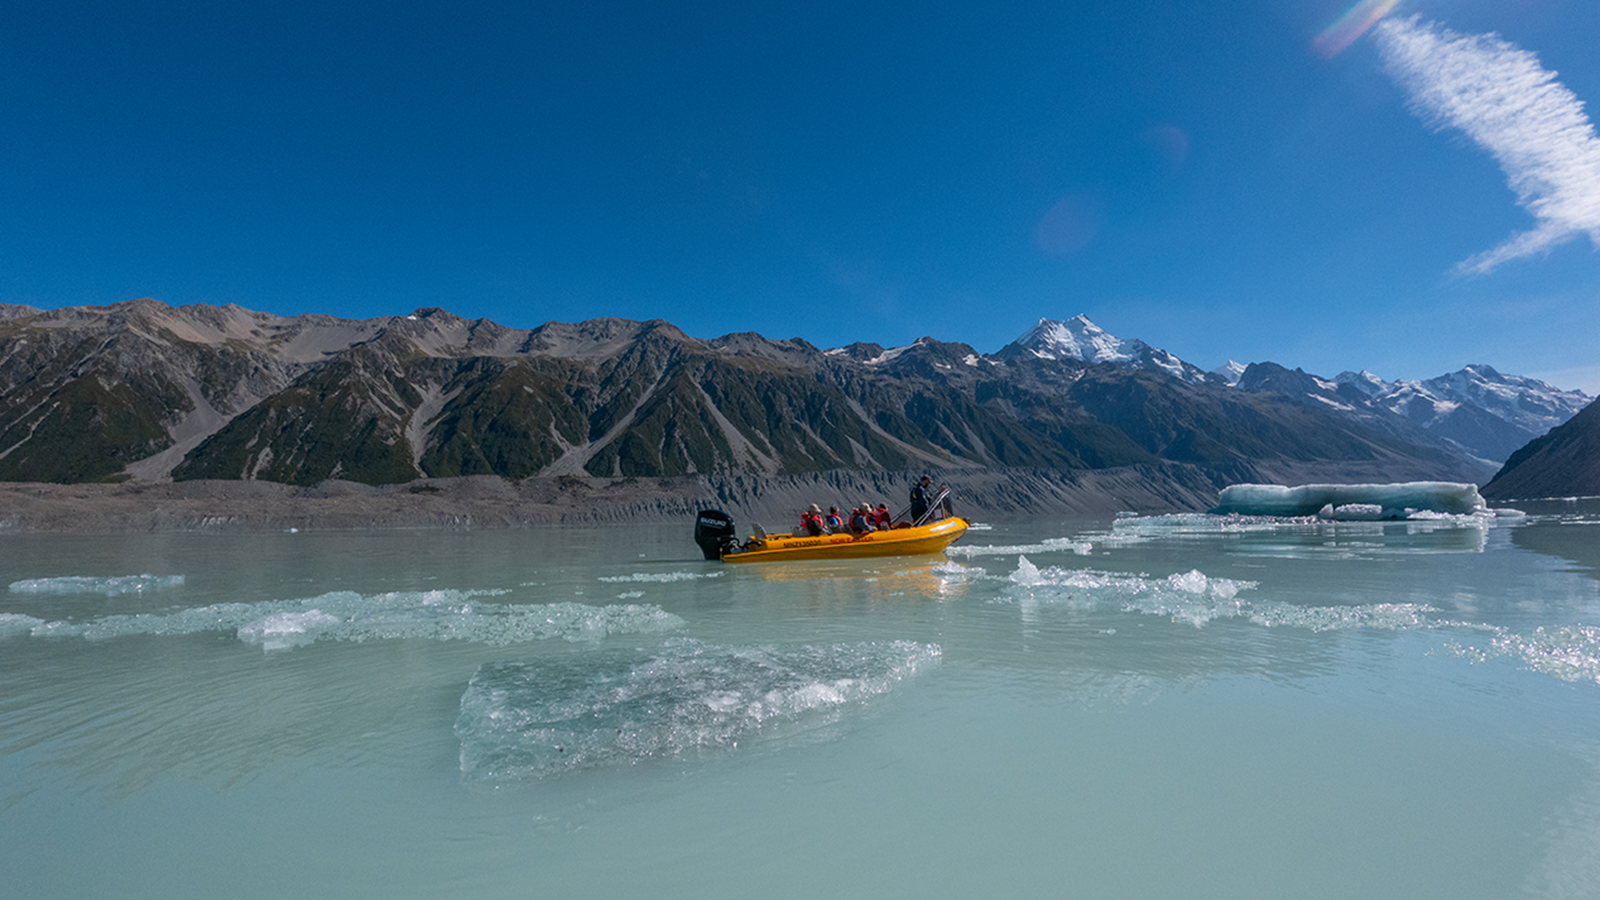 https://www.hermitage.co.nz/media/1816/glacier-explorers-on-the-tasman-glacial-lake-in-mount-cook-1.png?anchor=center&mode=crop&width=1600&height=900&rnd=133504119840000000&quality=90